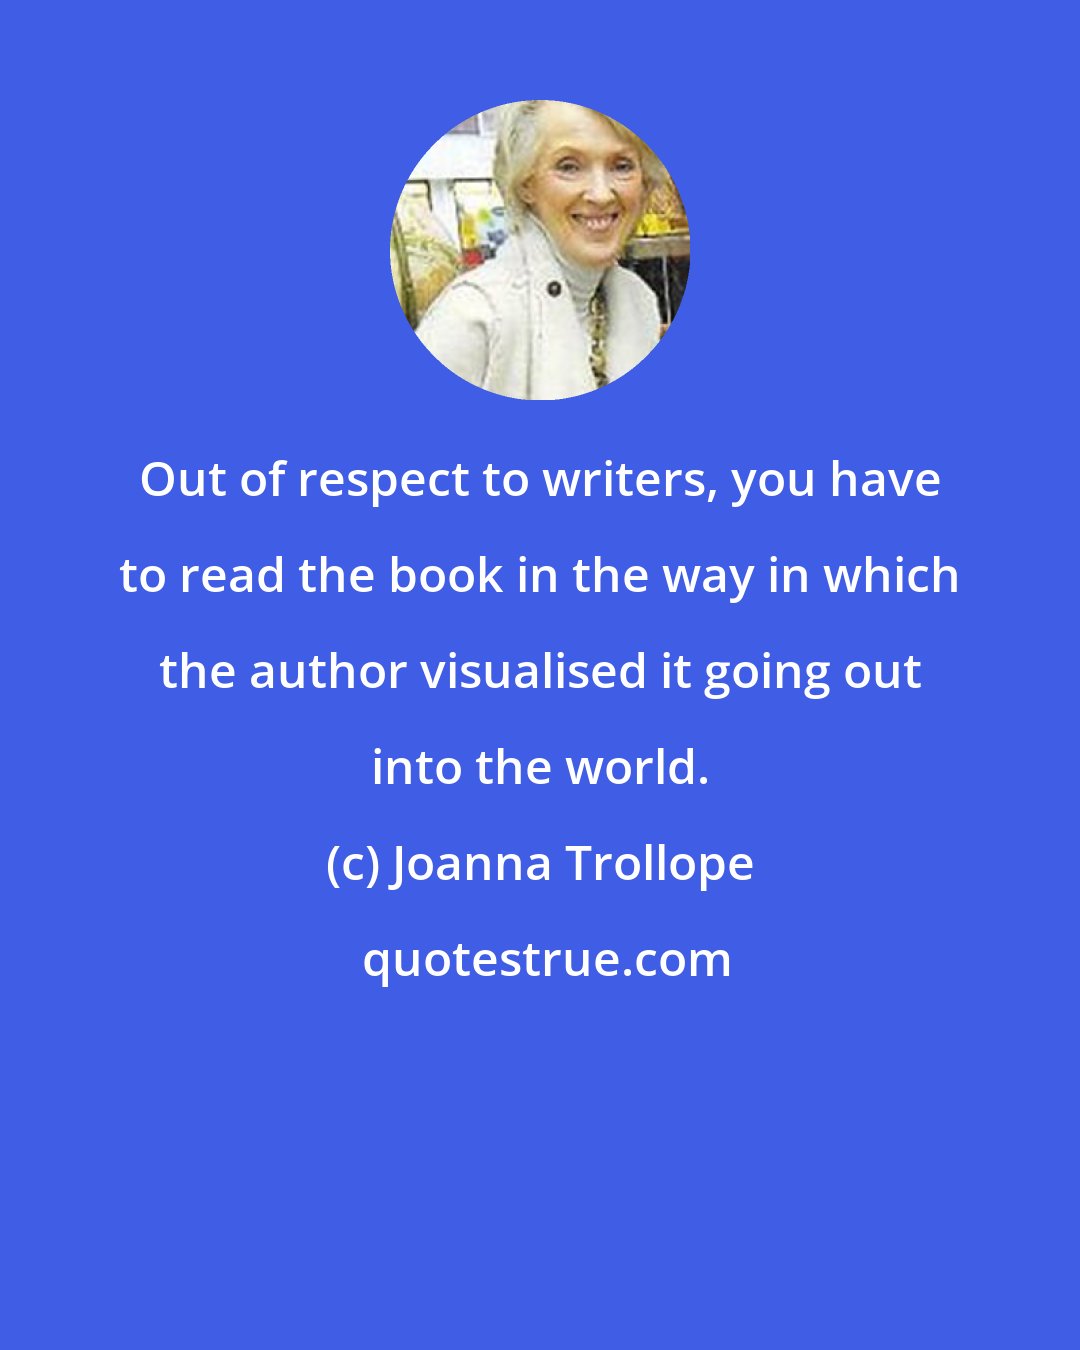 Joanna Trollope: Out of respect to writers, you have to read the book in the way in which the author visualised it going out into the world.